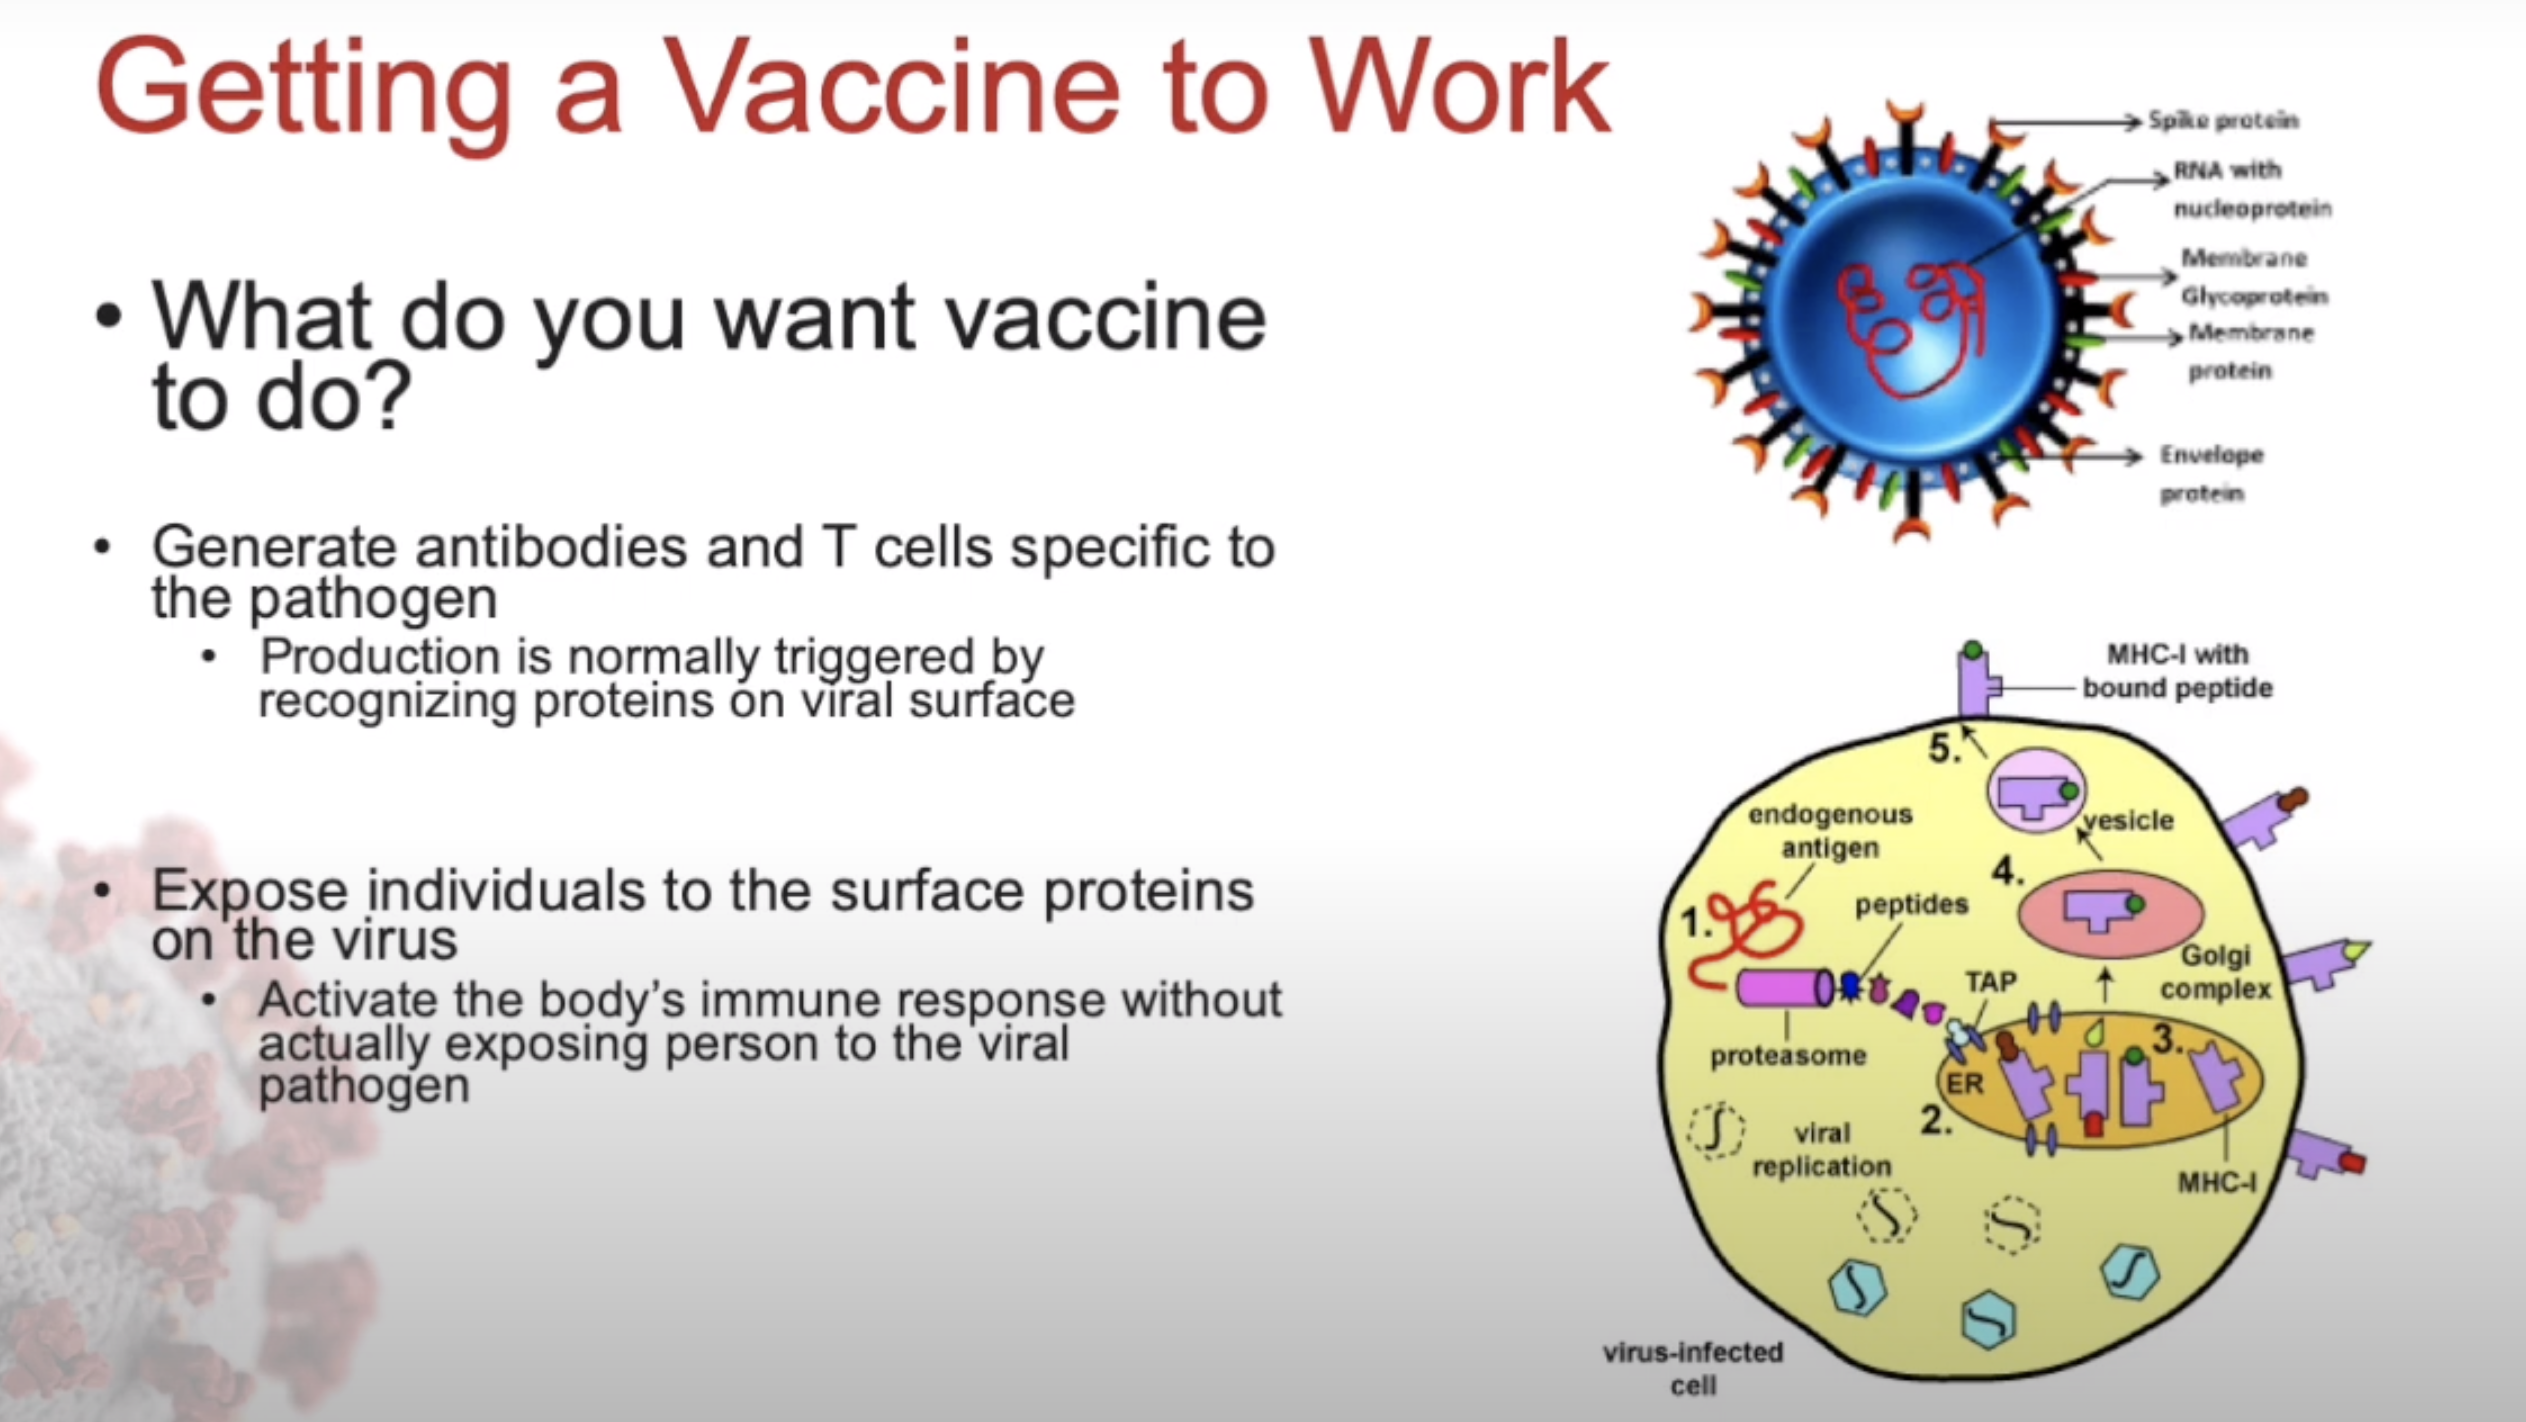 The COVID Vaccine: Good Science and Science for the Human Good